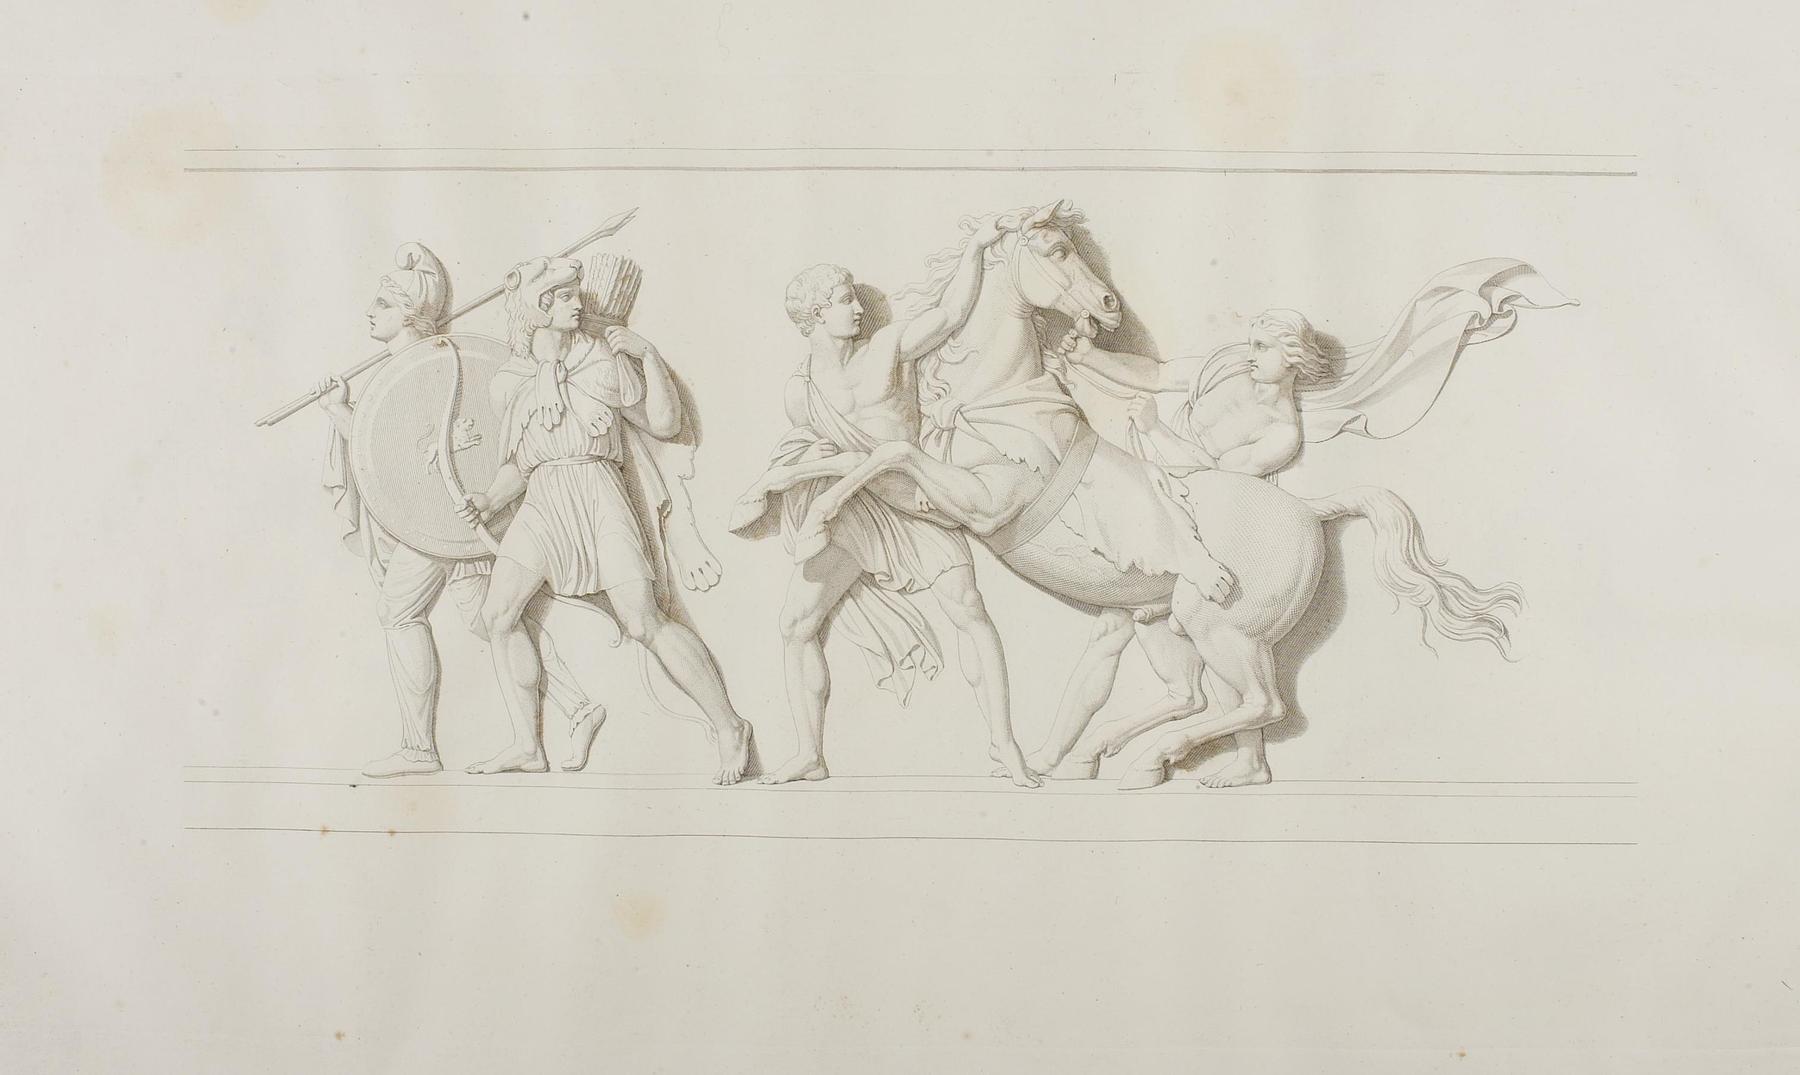 Alexander the Great's Armour Bearers and Bucephalus, E33,4